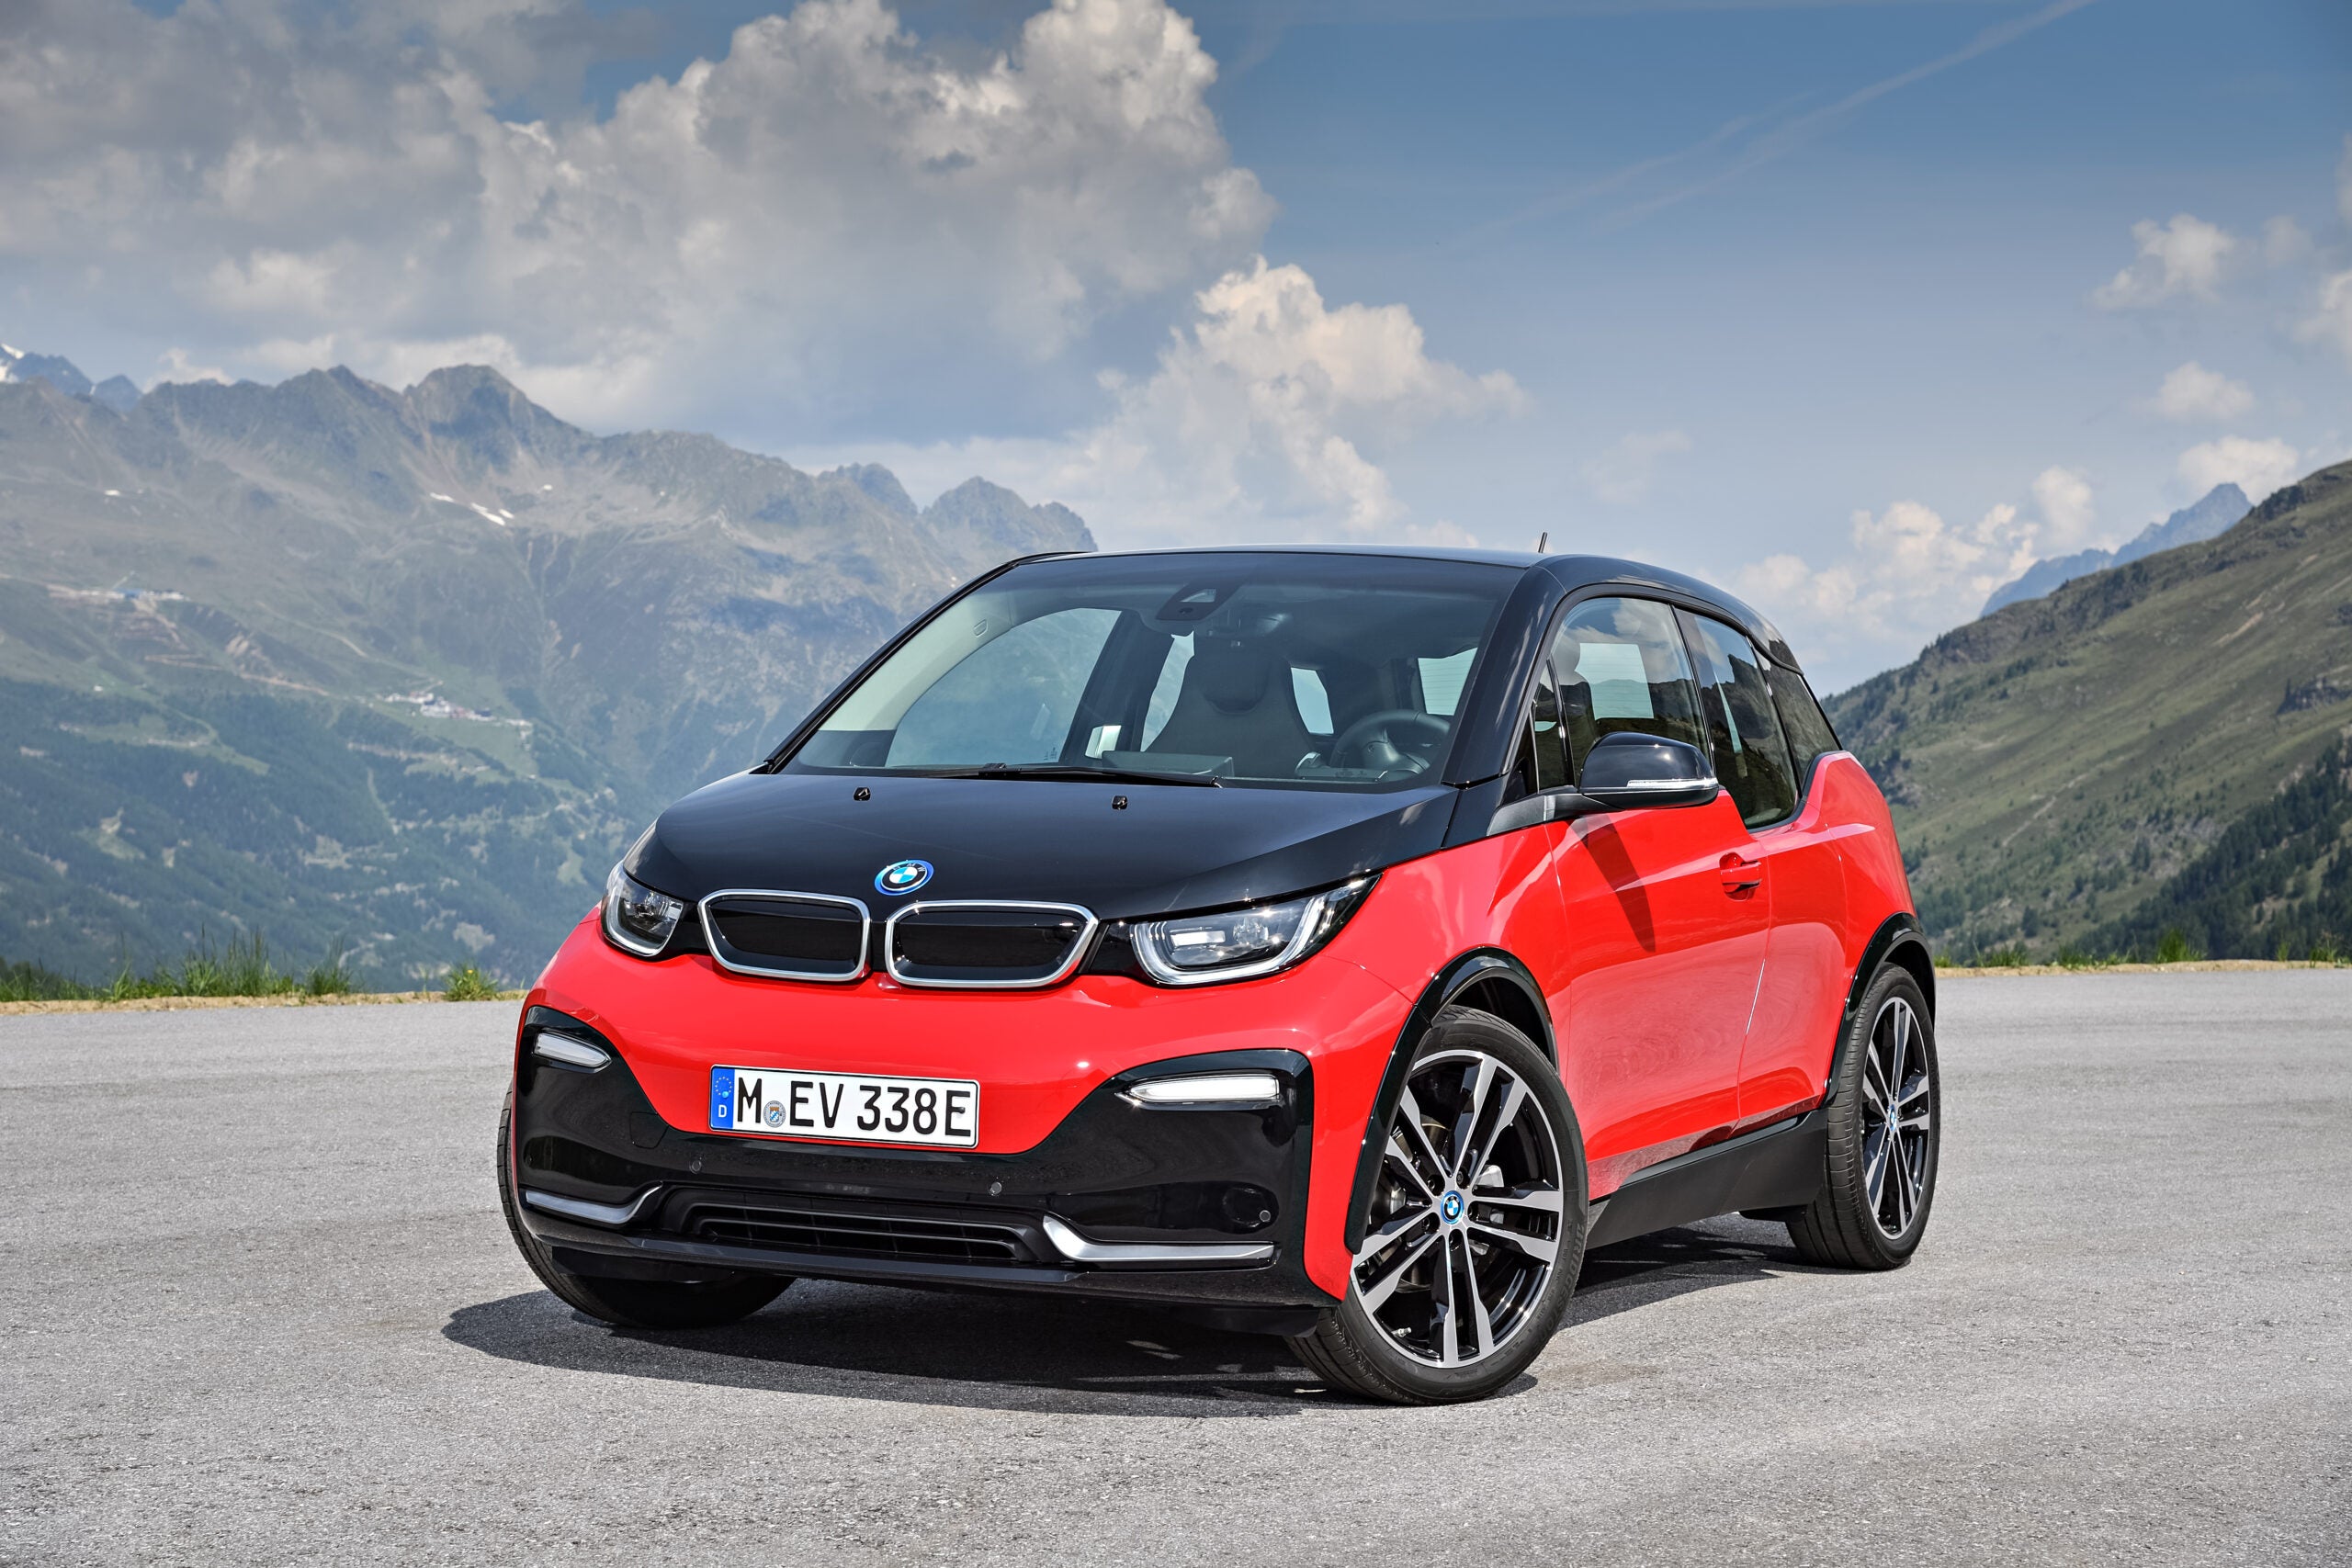 The 2018 BMW i3 offers a fresh take on daily driving